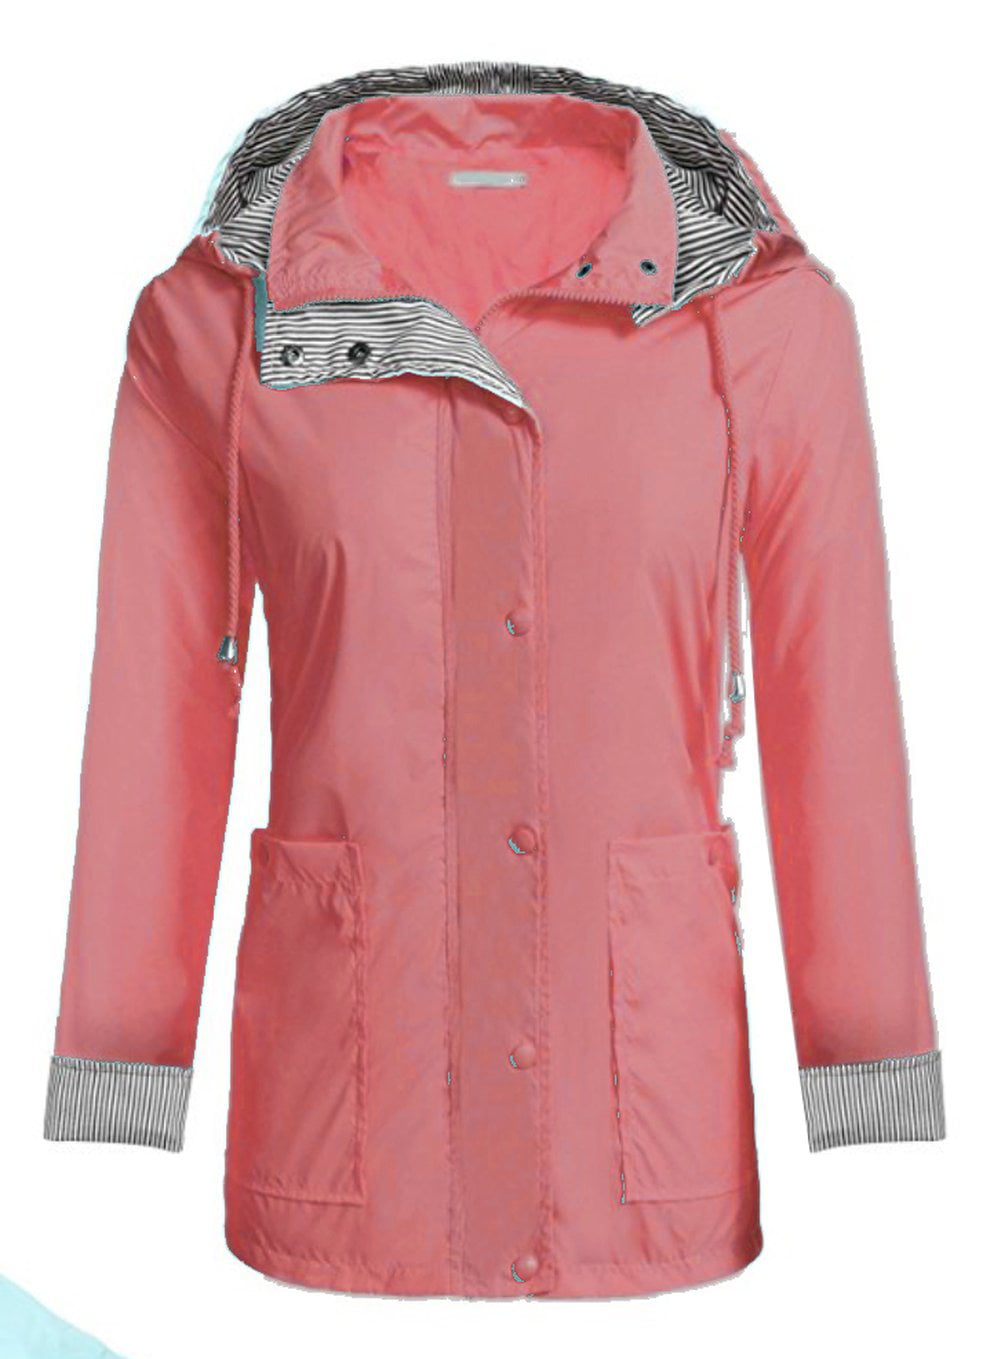 Lightweight Women Hooded Raincoat with Pockets Long Sleeve Outdoor ...